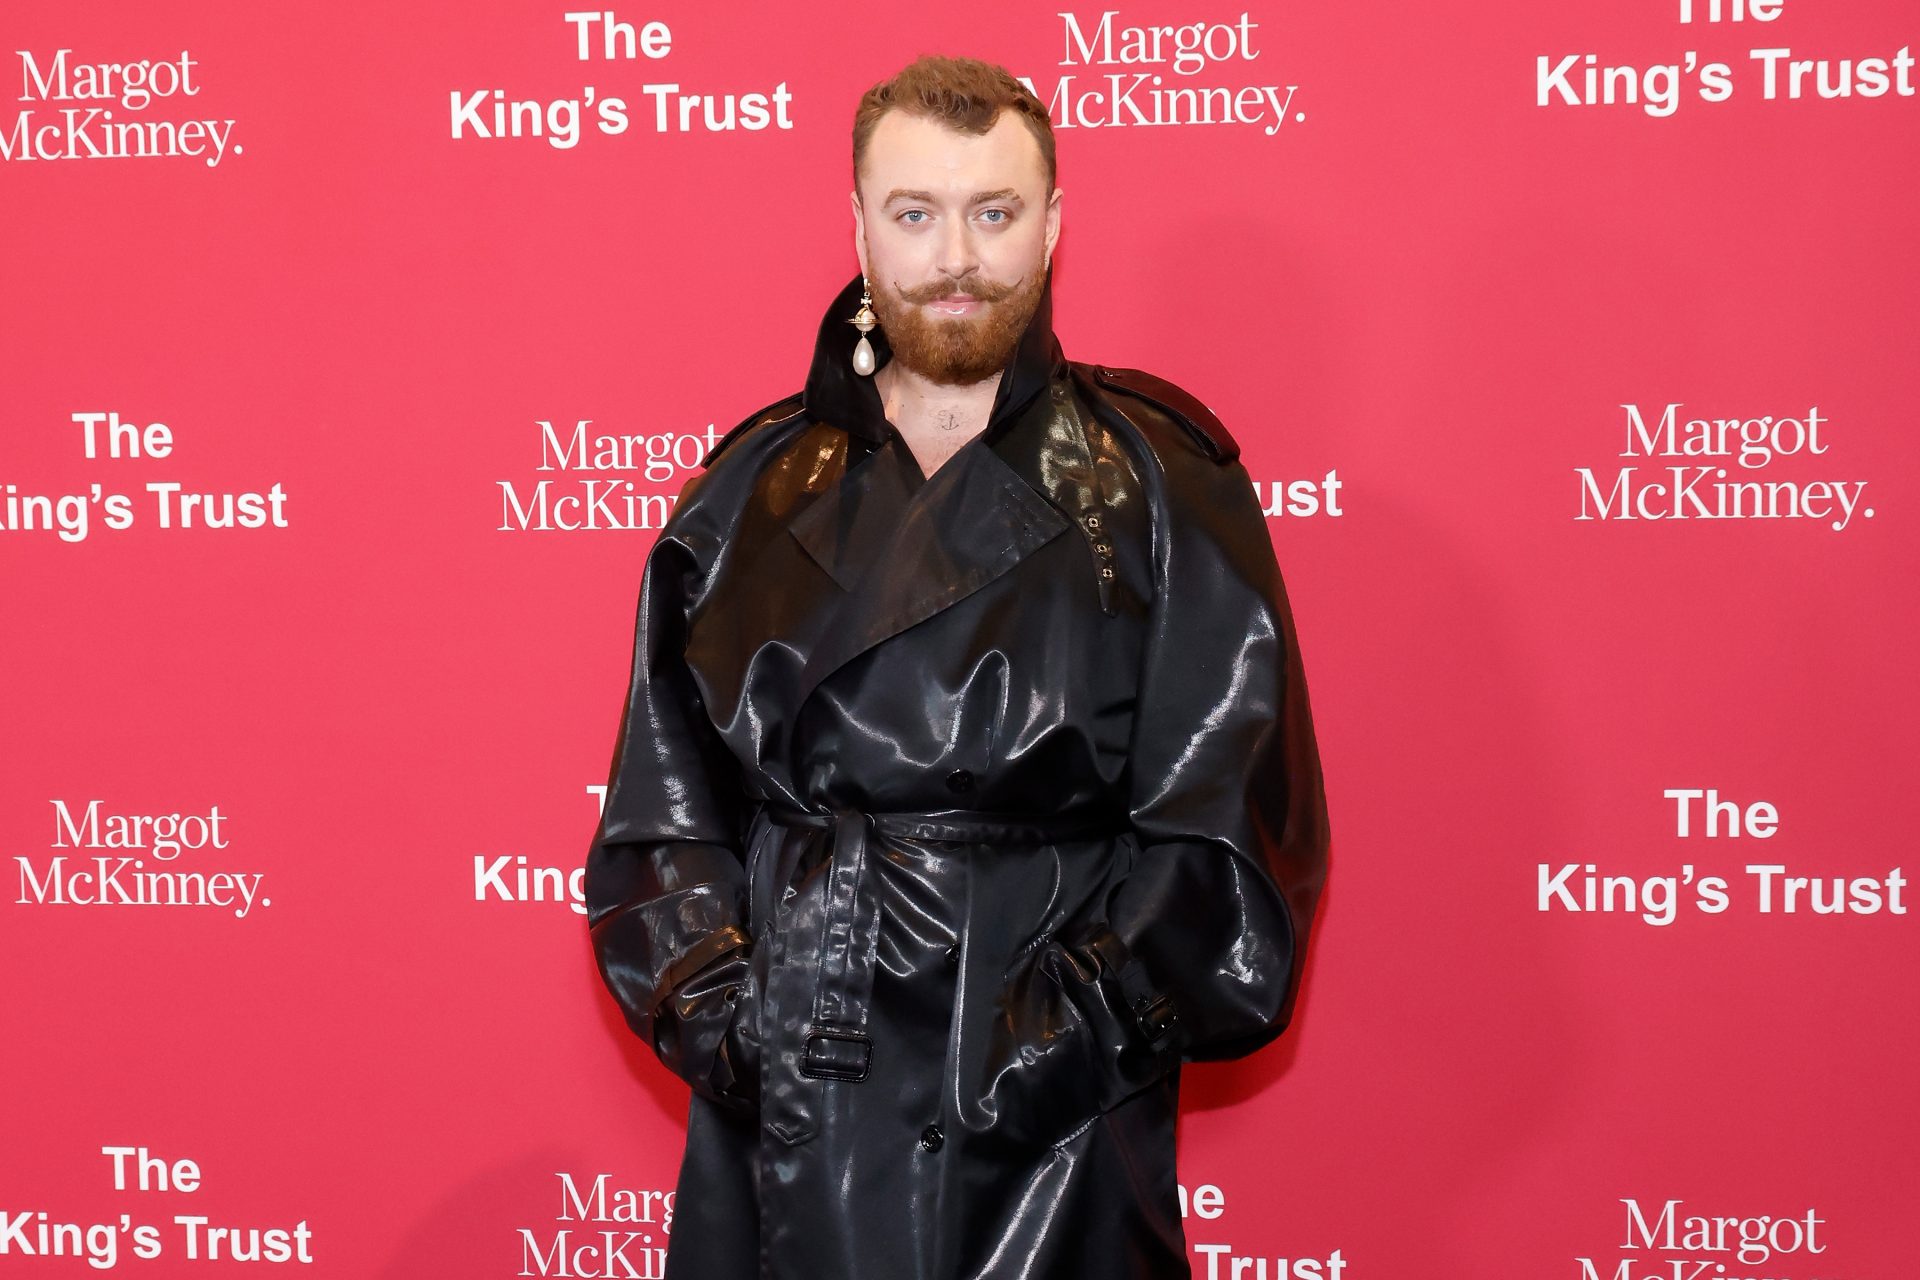 Sam Smith at the King's Trust Global Gala